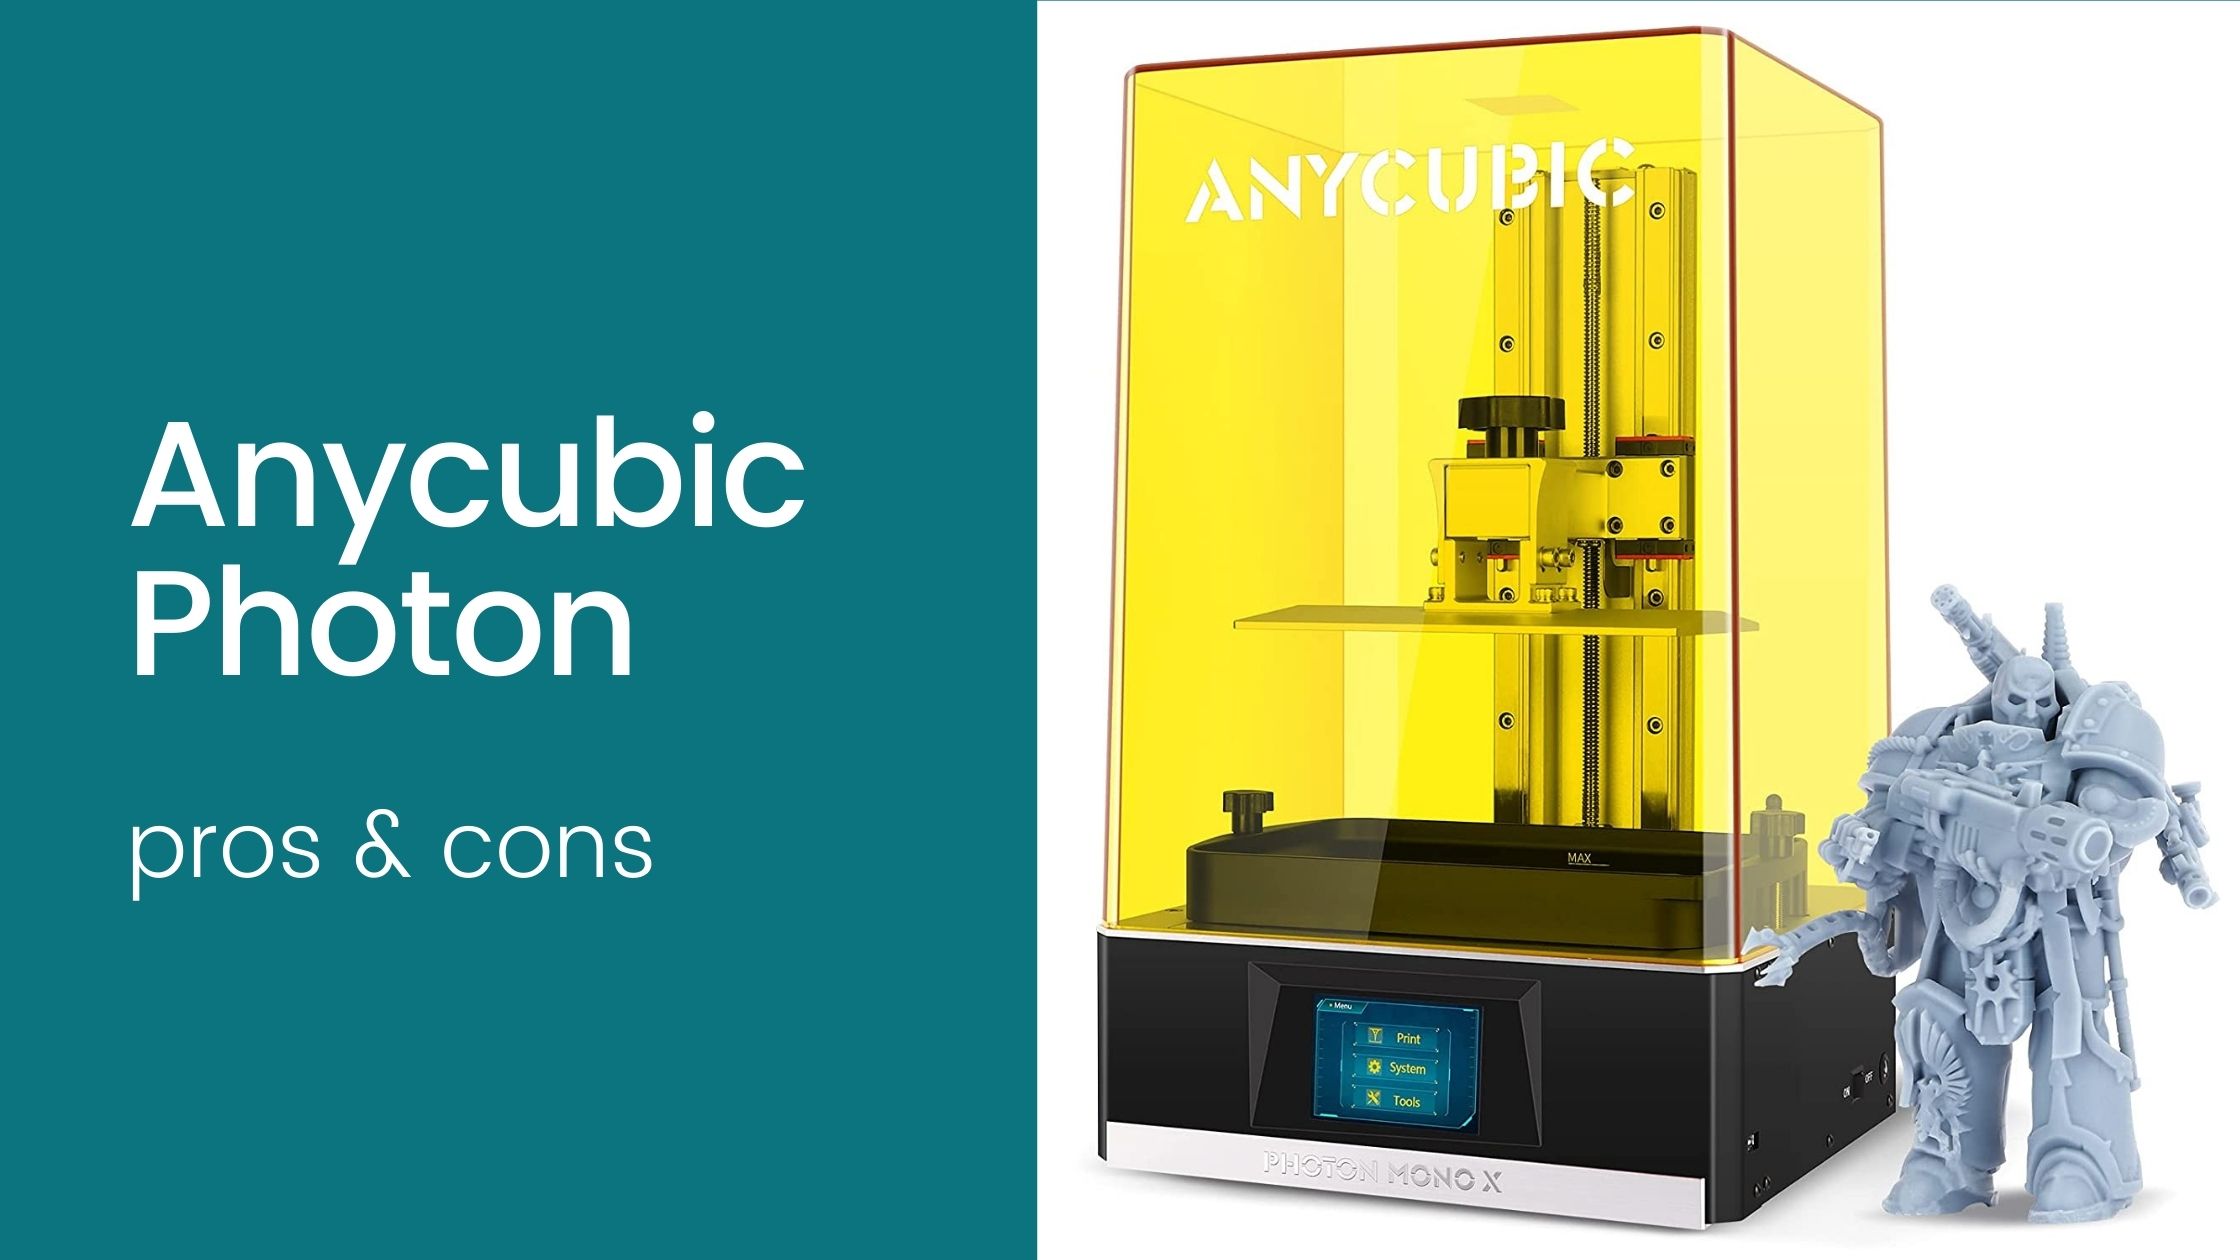 Anycubic Photon pros & cons